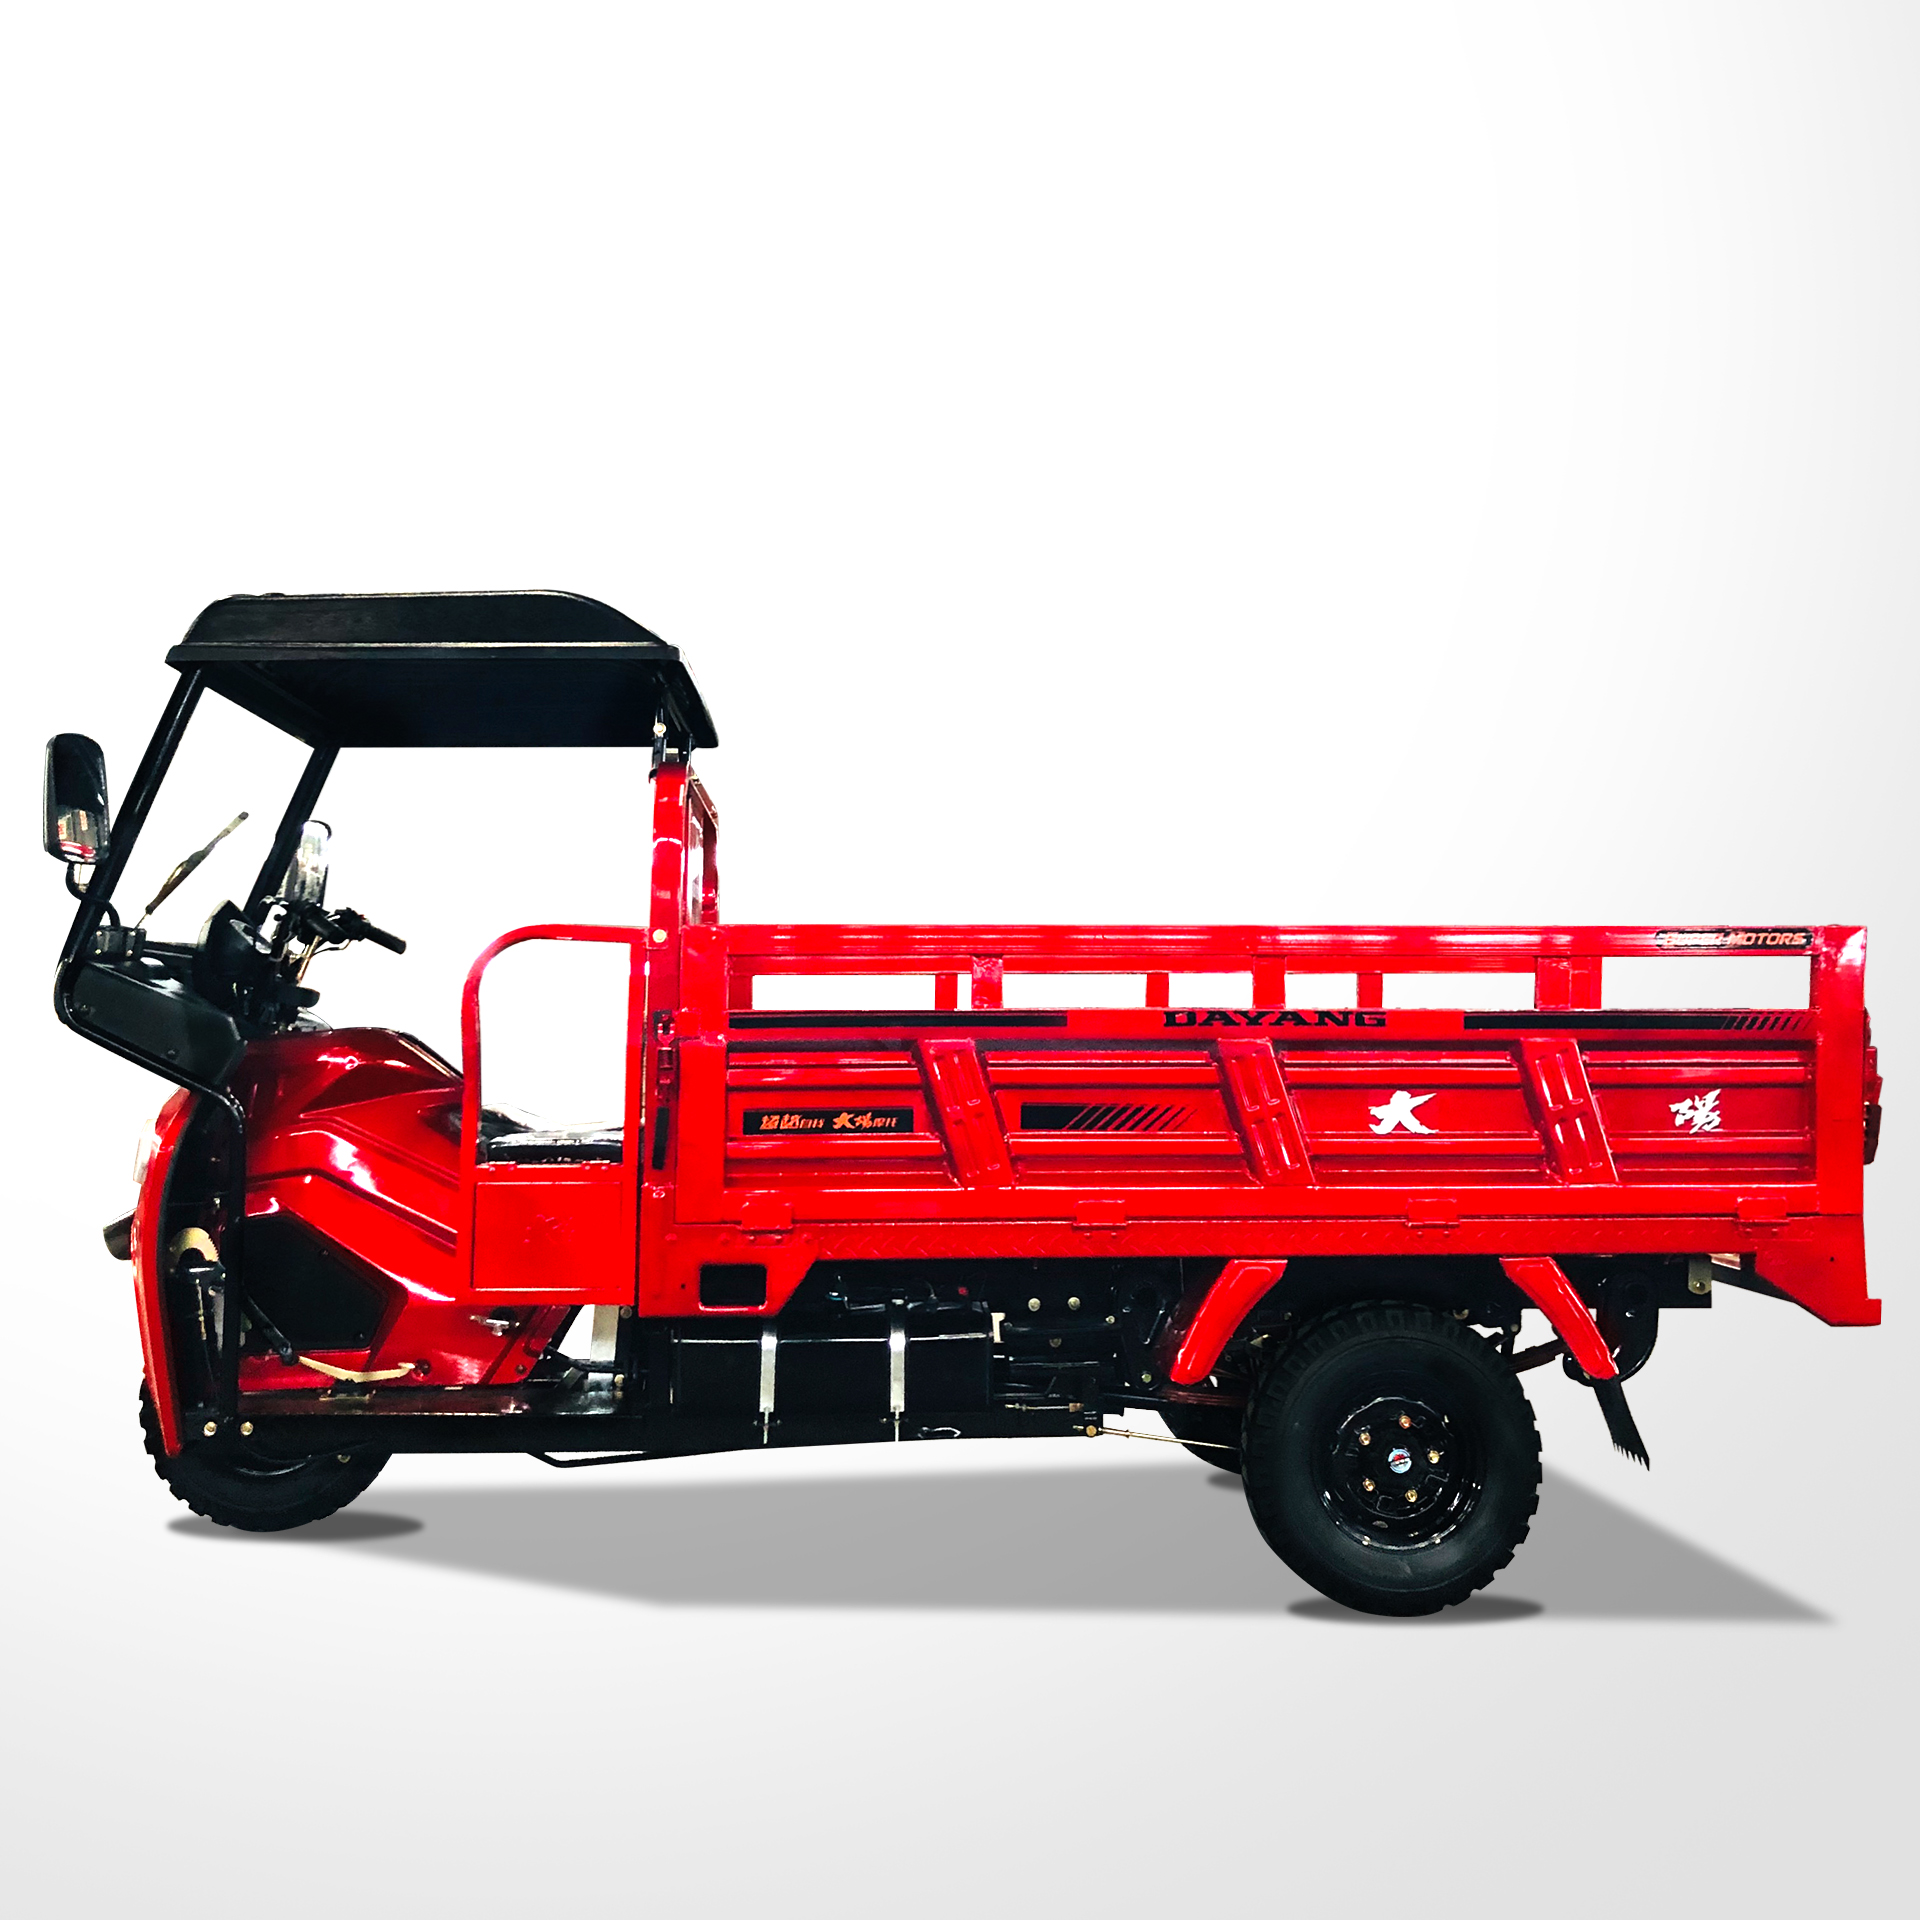 Hot selling China tricycle with motor and cargo box  in ghana 3 Wheel for Adult Power Engine  water Cooling